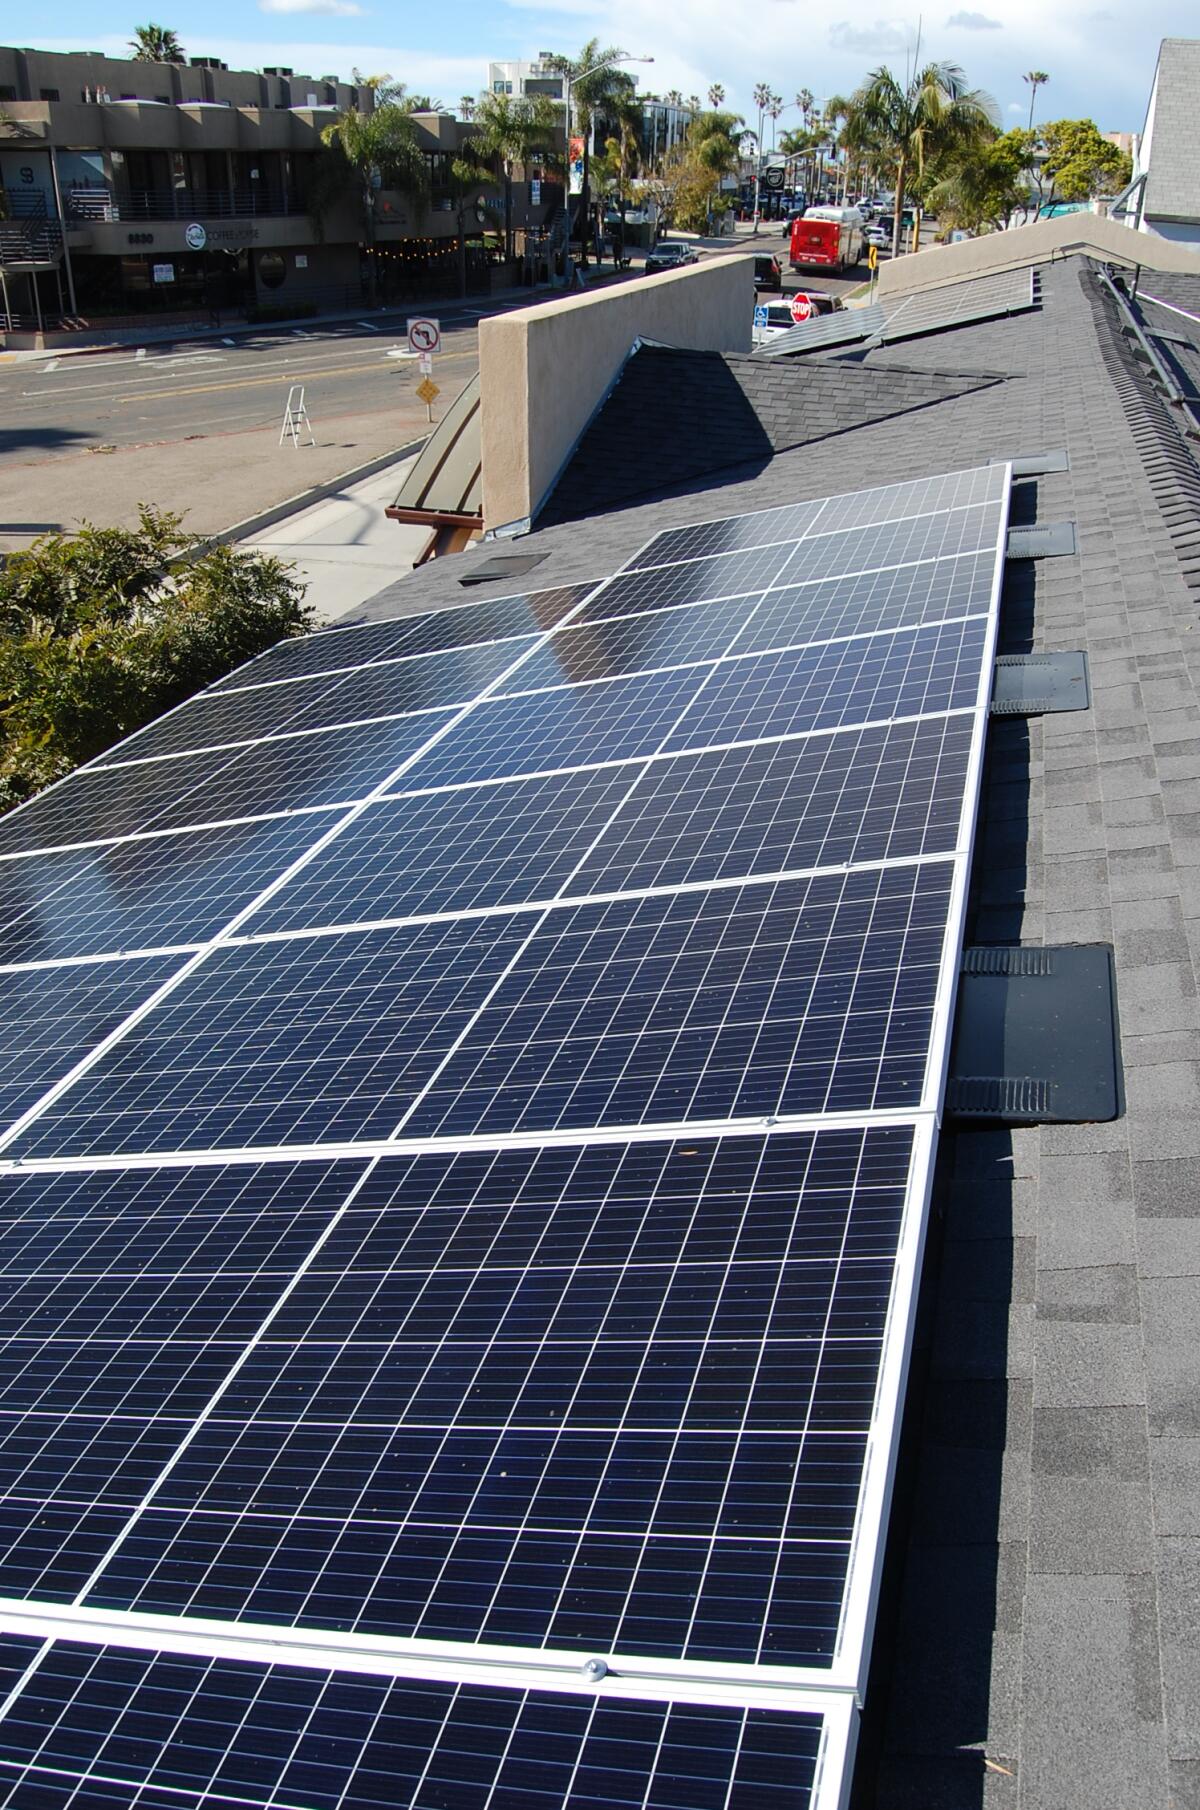 The La Jolla Community Center has completed a two-year project to install a new roof and solar panels.